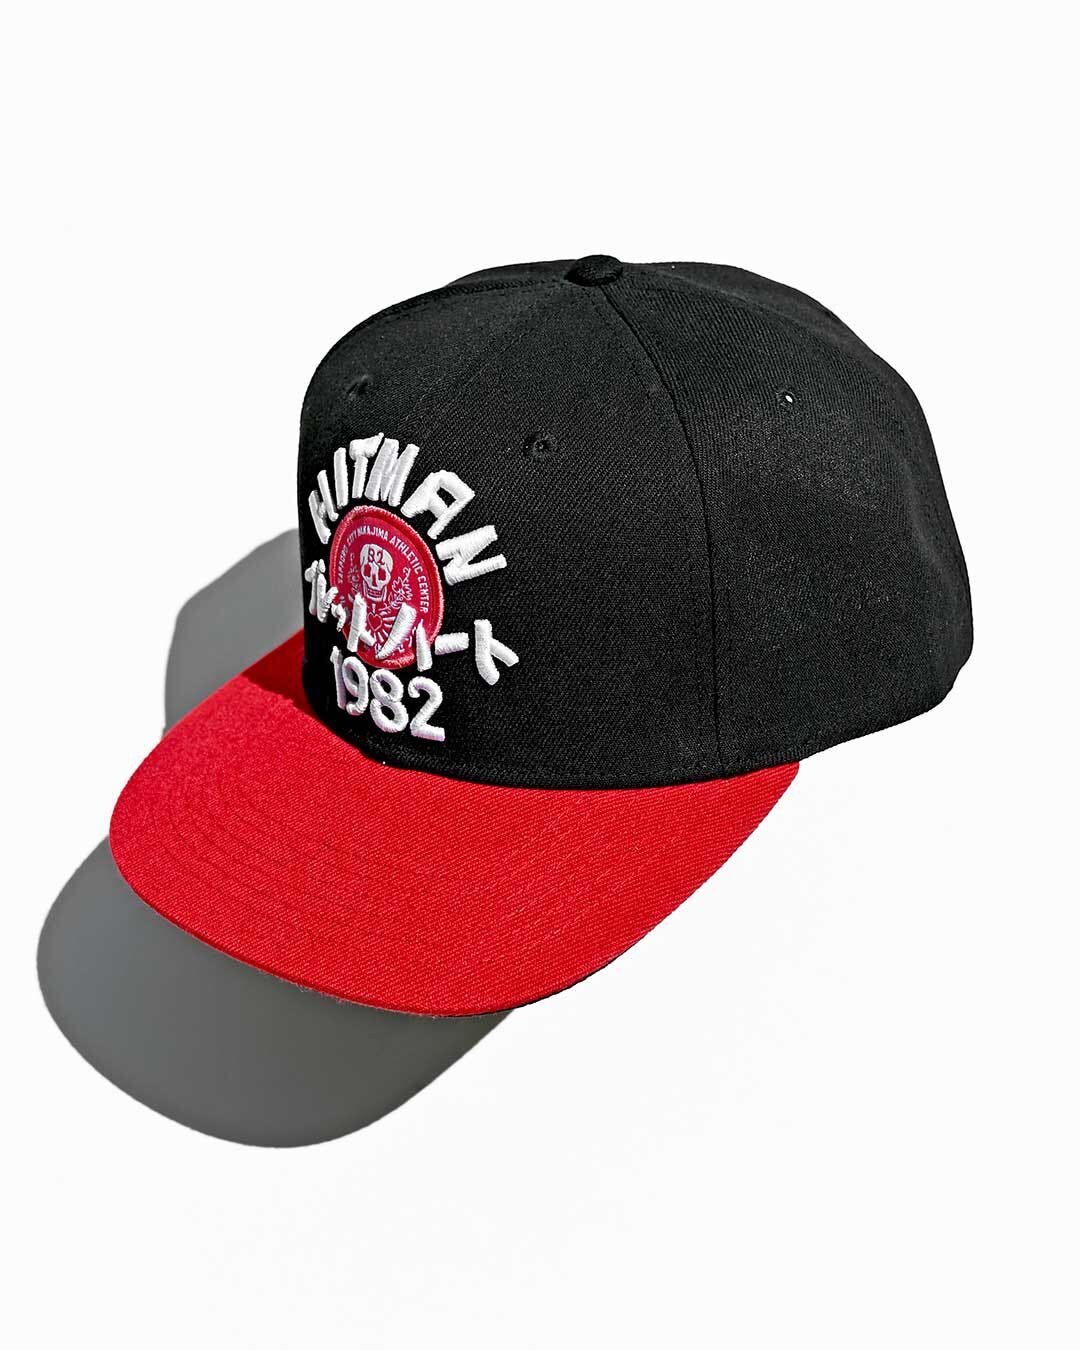 Bret Hart Japan Snapback Hat - Roots of Fight Canada